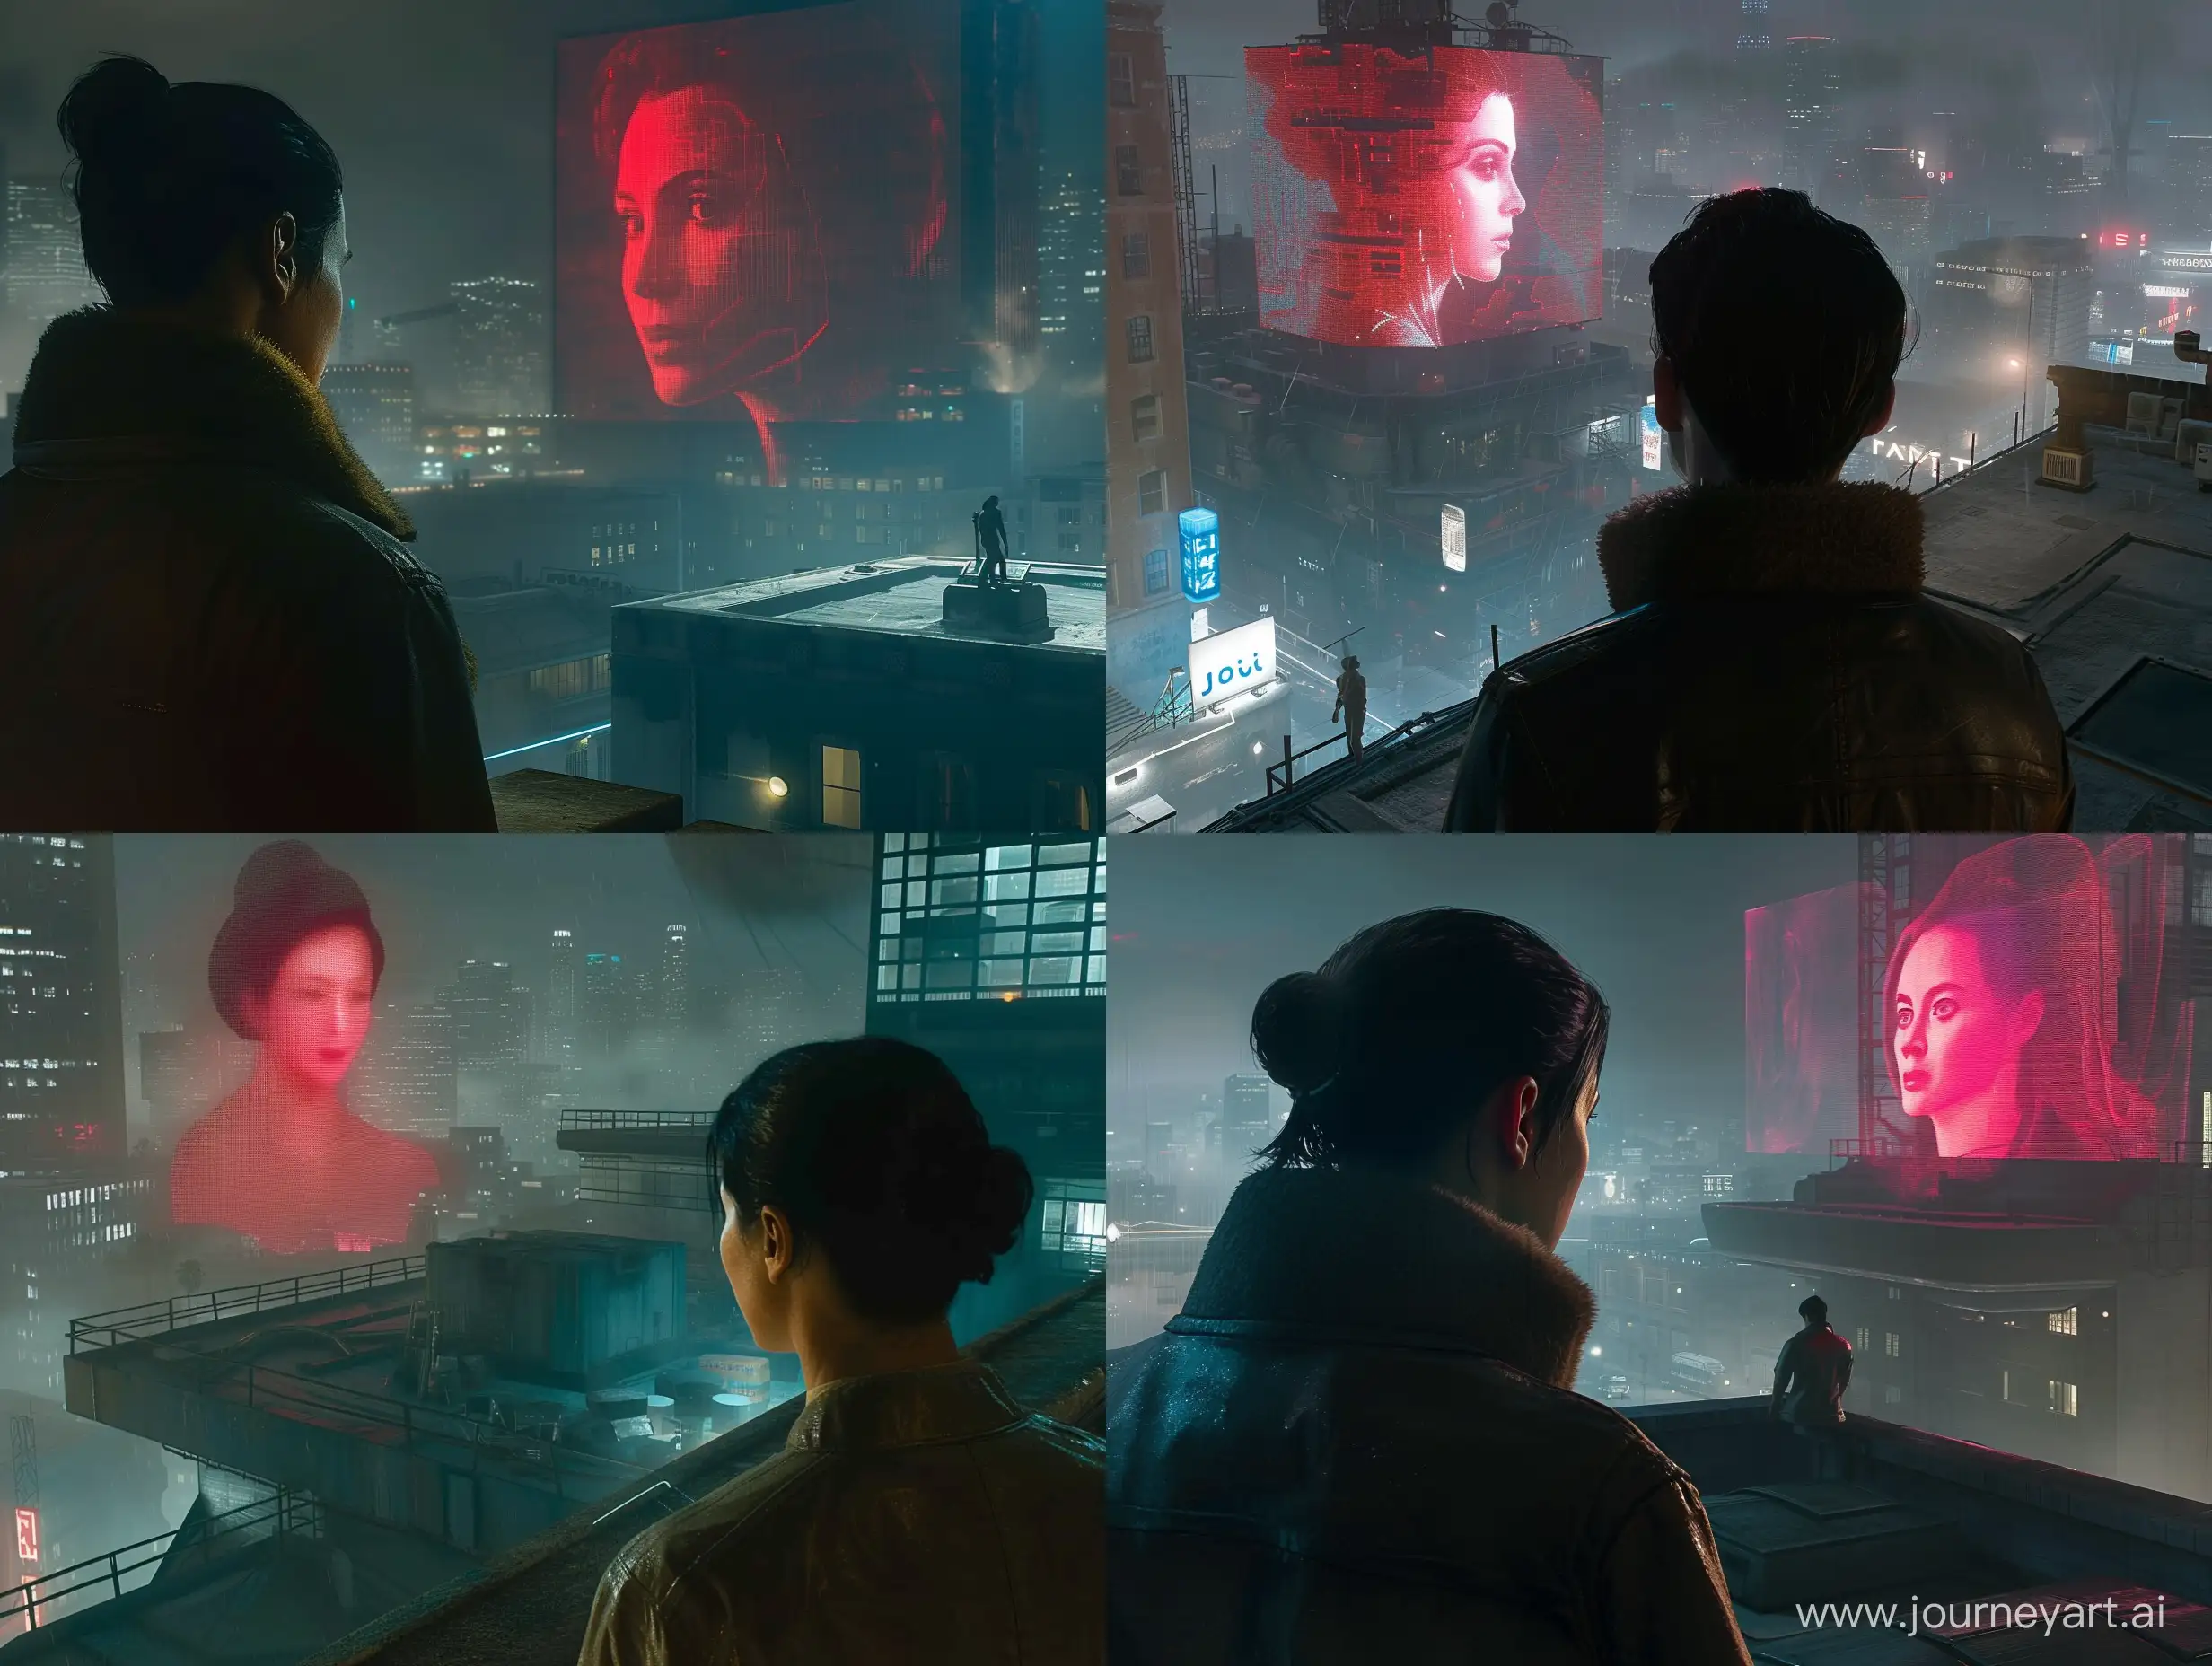 "Blade Runner 2049" is a video game set in a futuristic city in Los Angeles, featuring advanced ray tracing graphics and a third-person perspective from behind. Specifically designed for the PS5, this version follows the main character, portrayed by Ryan Gosling, as he explores a rooftop environment and observes a large holographic woman name joi on a faraway skyscraper, delivering an expansive open-world adventure powered by the Unreal Engine, all set in a nighttime atmosphere 